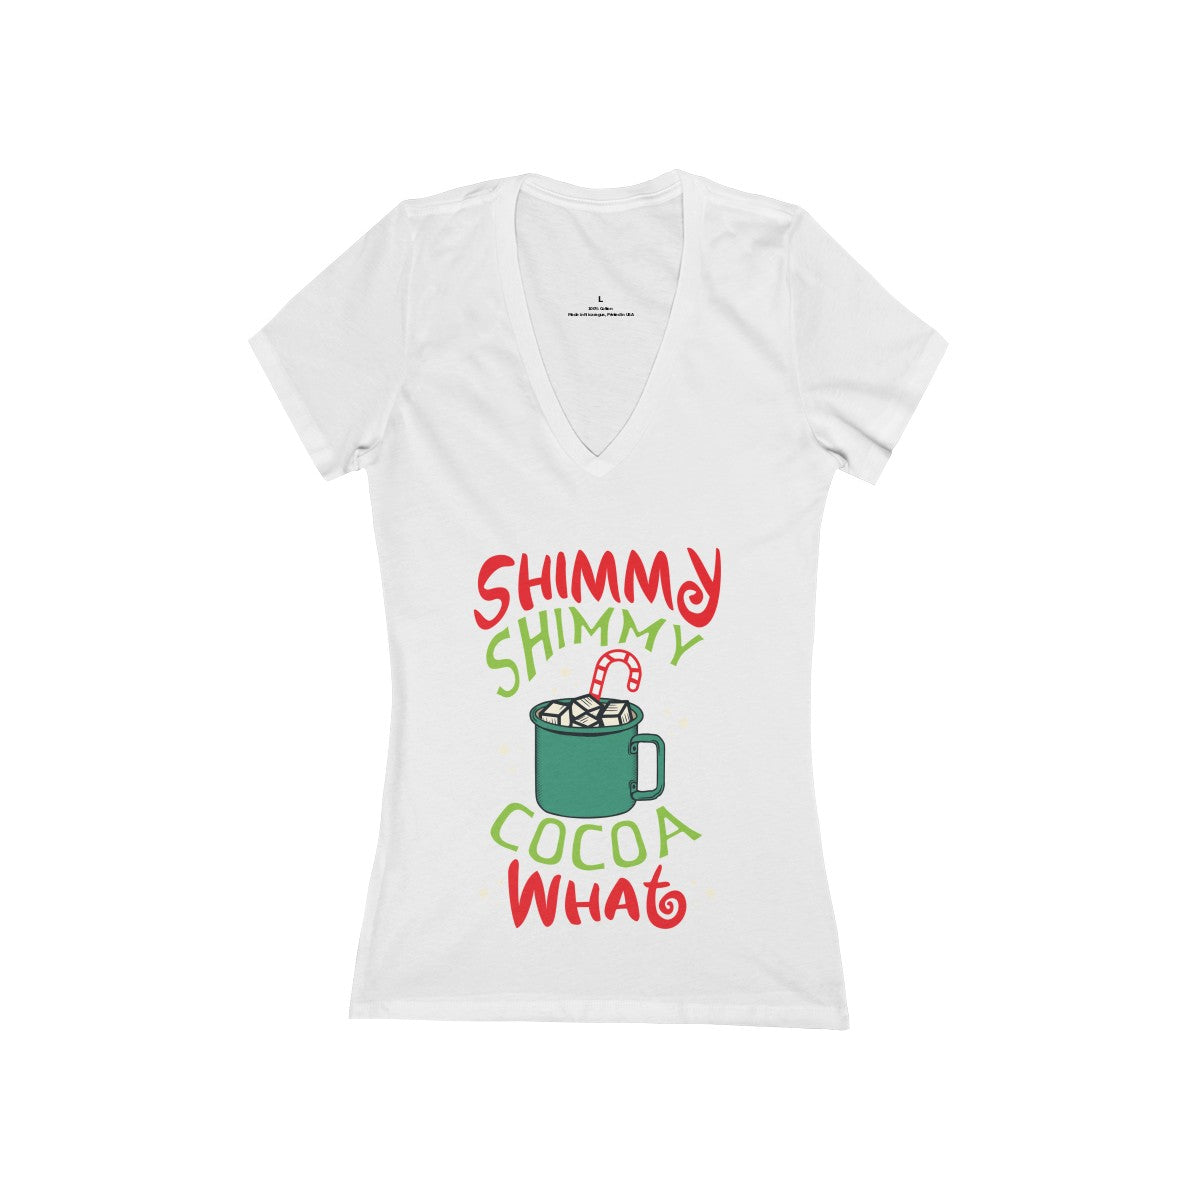 Shimmy Shimmy Cocoa What V-Neck Tee - Alpha Dawg Designs